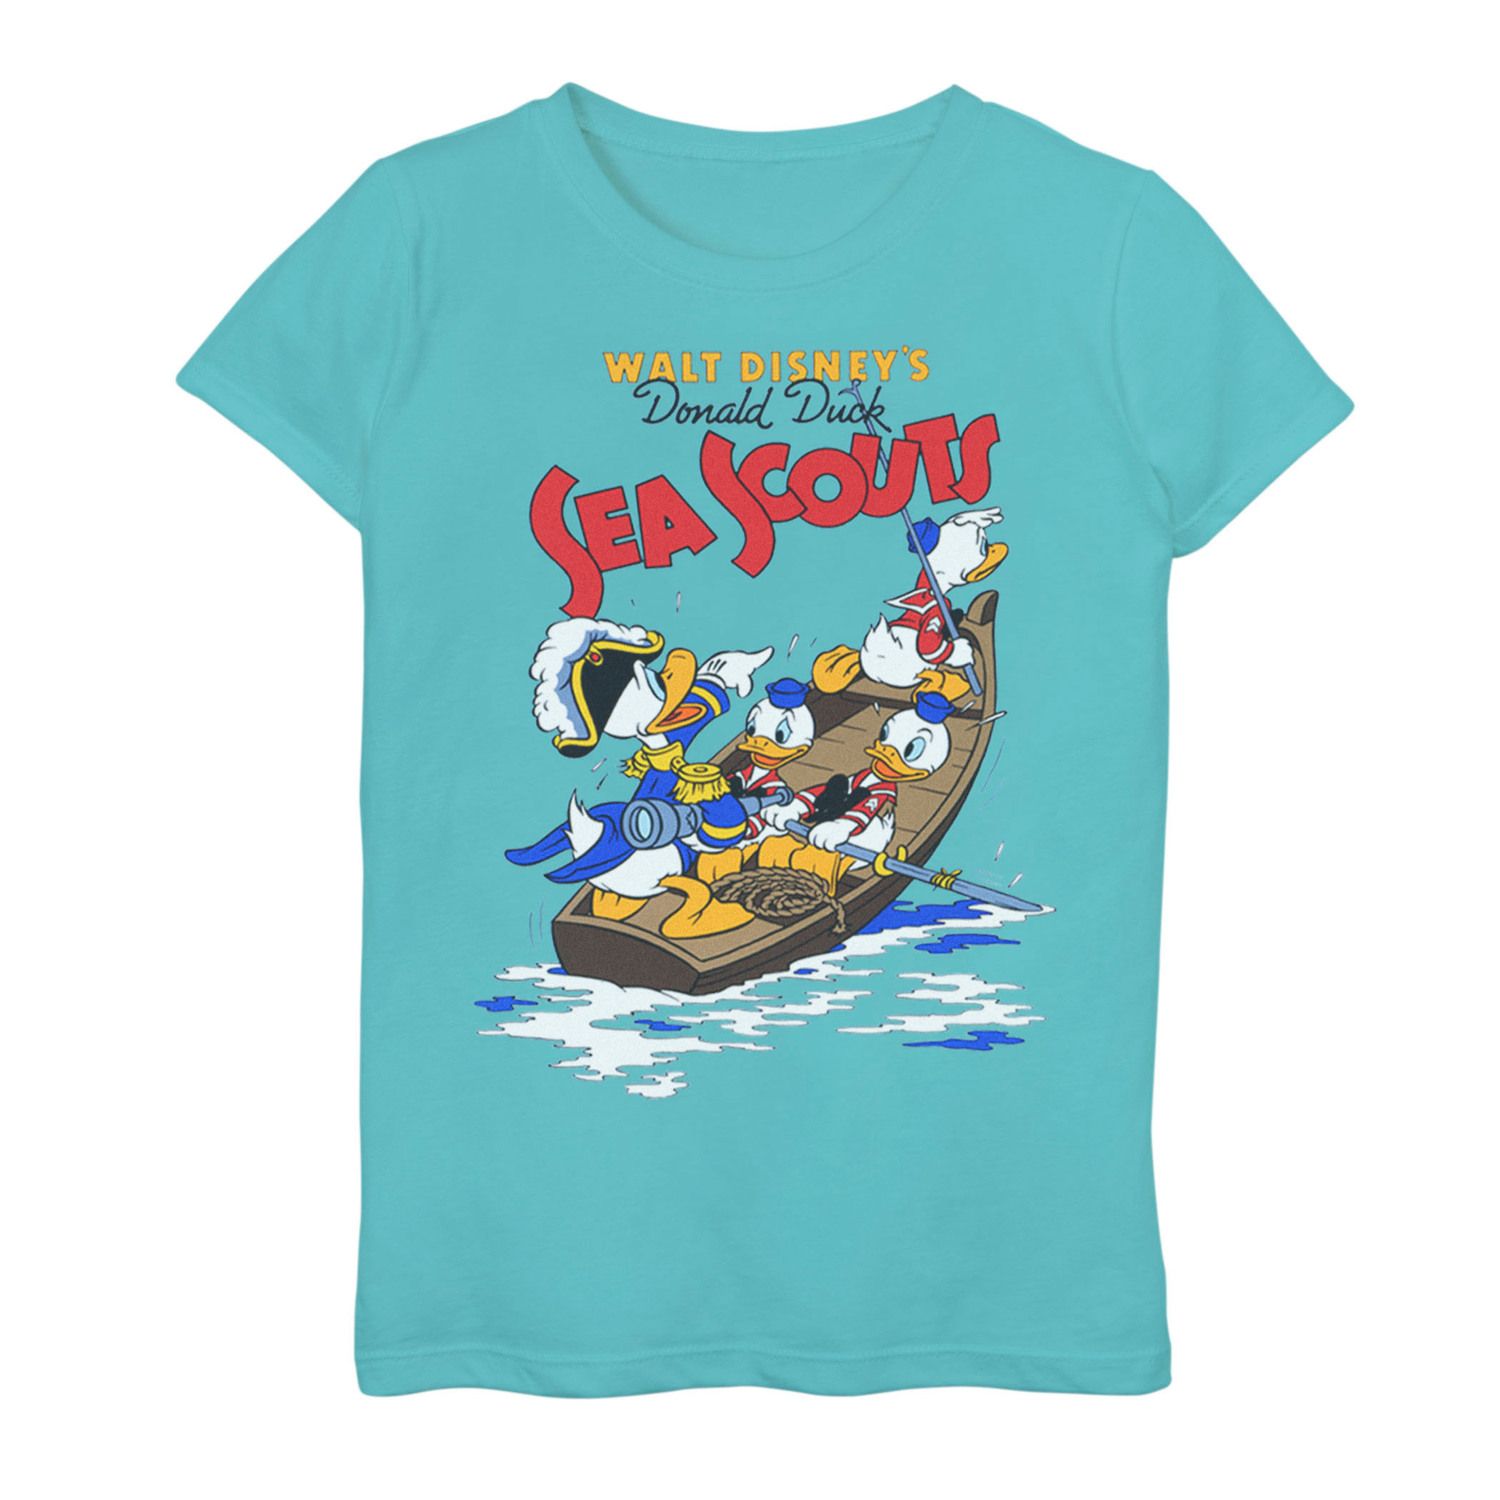 Image for Disney 's Mickey Mouse Girls 7-16 Donald Duck Sea Scouts Tee at Kohl's.